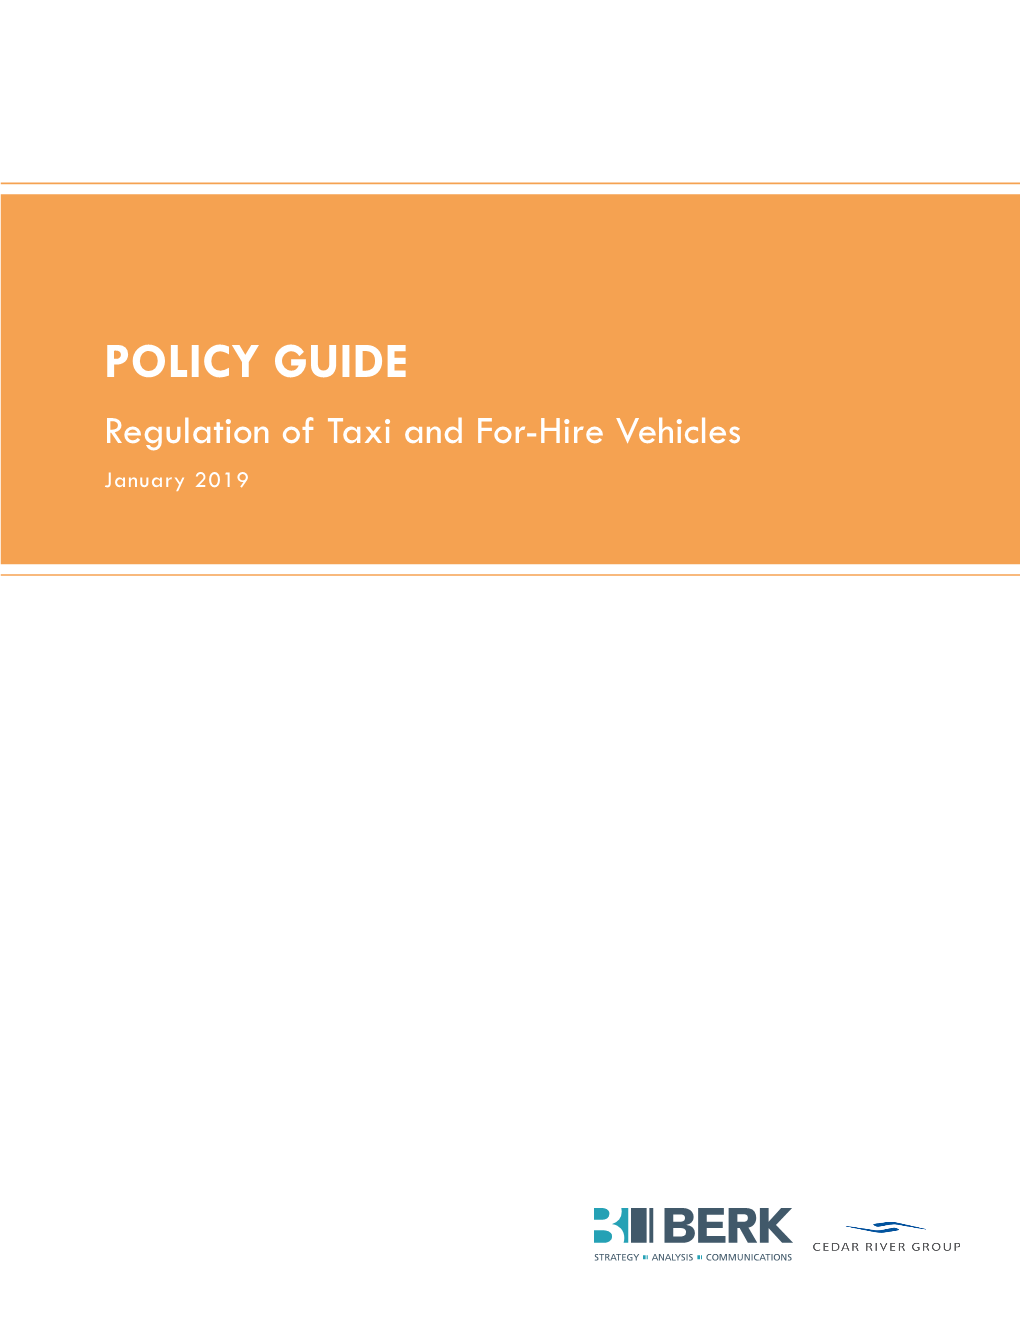 JTC Taxi and For-Hire Regulation Policy Guide